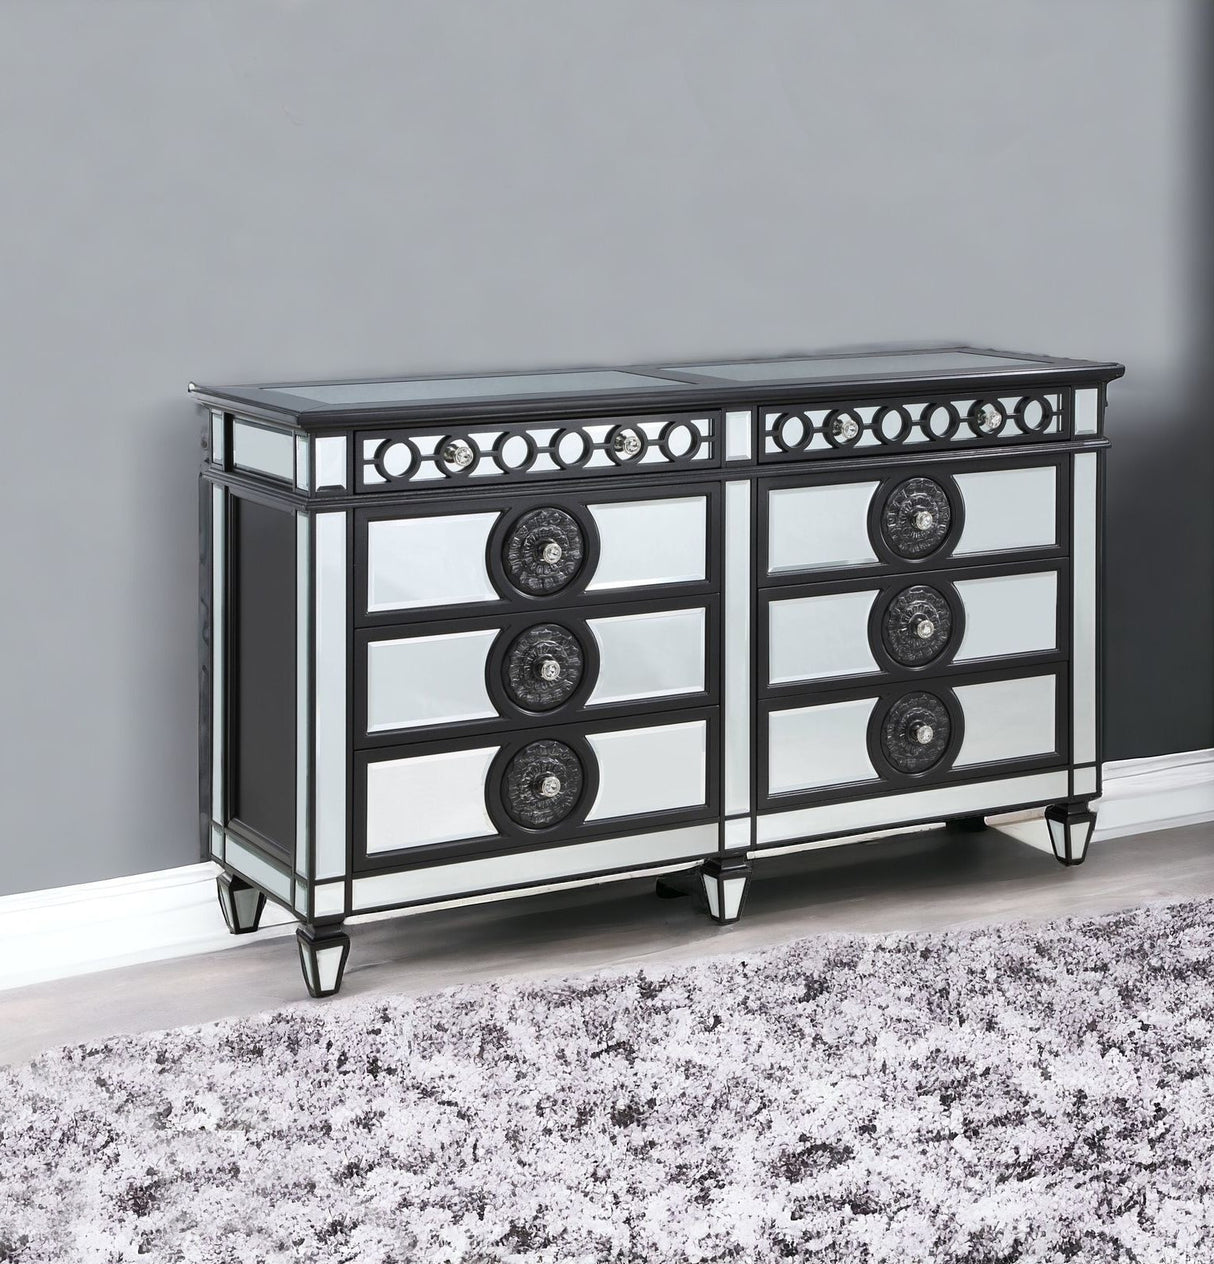 68" Black and Silver Solid and Manufactured Wood Mirrored Eight Drawer Double Dresser